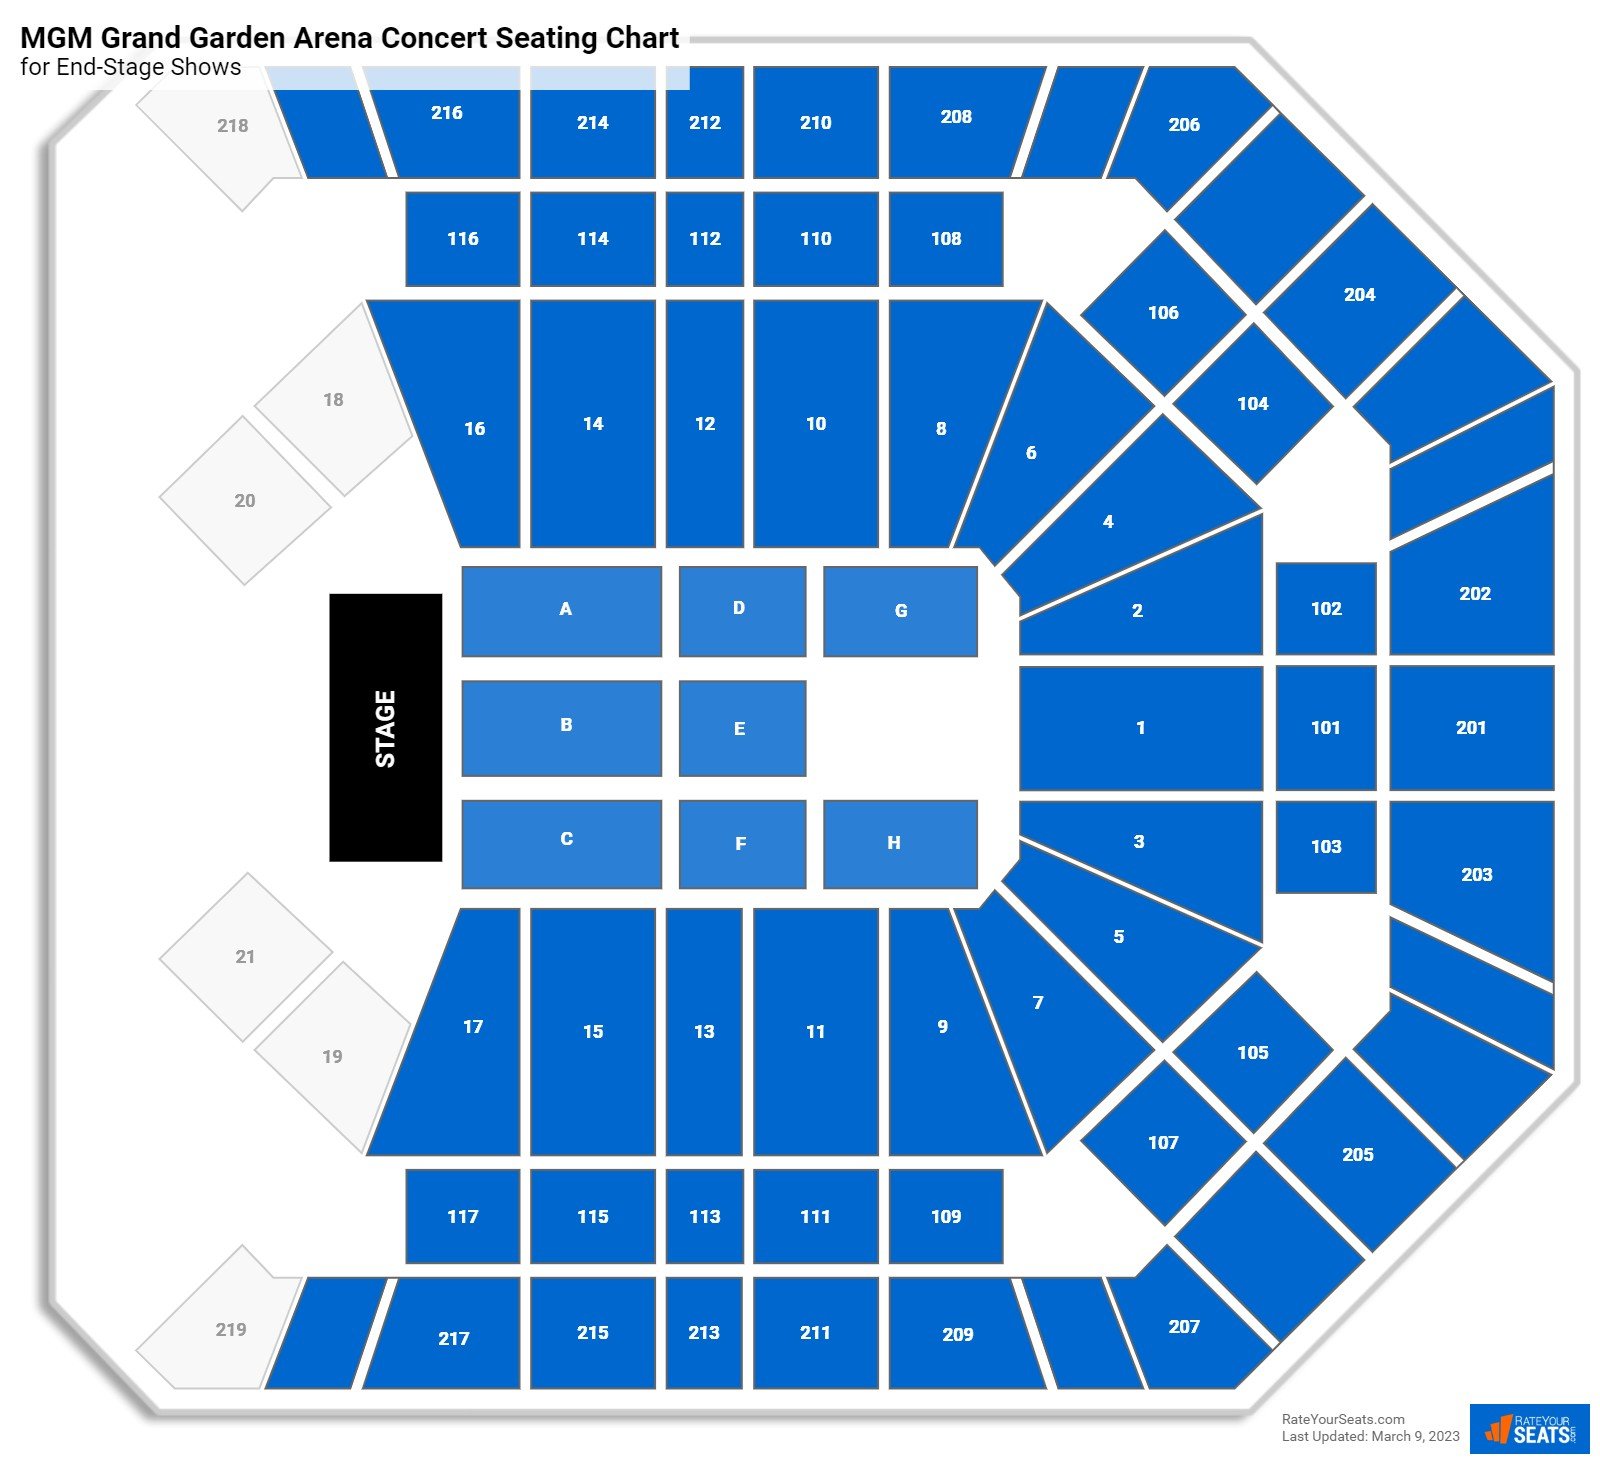 MGM Grand Garden Arena Concert Seating Chart